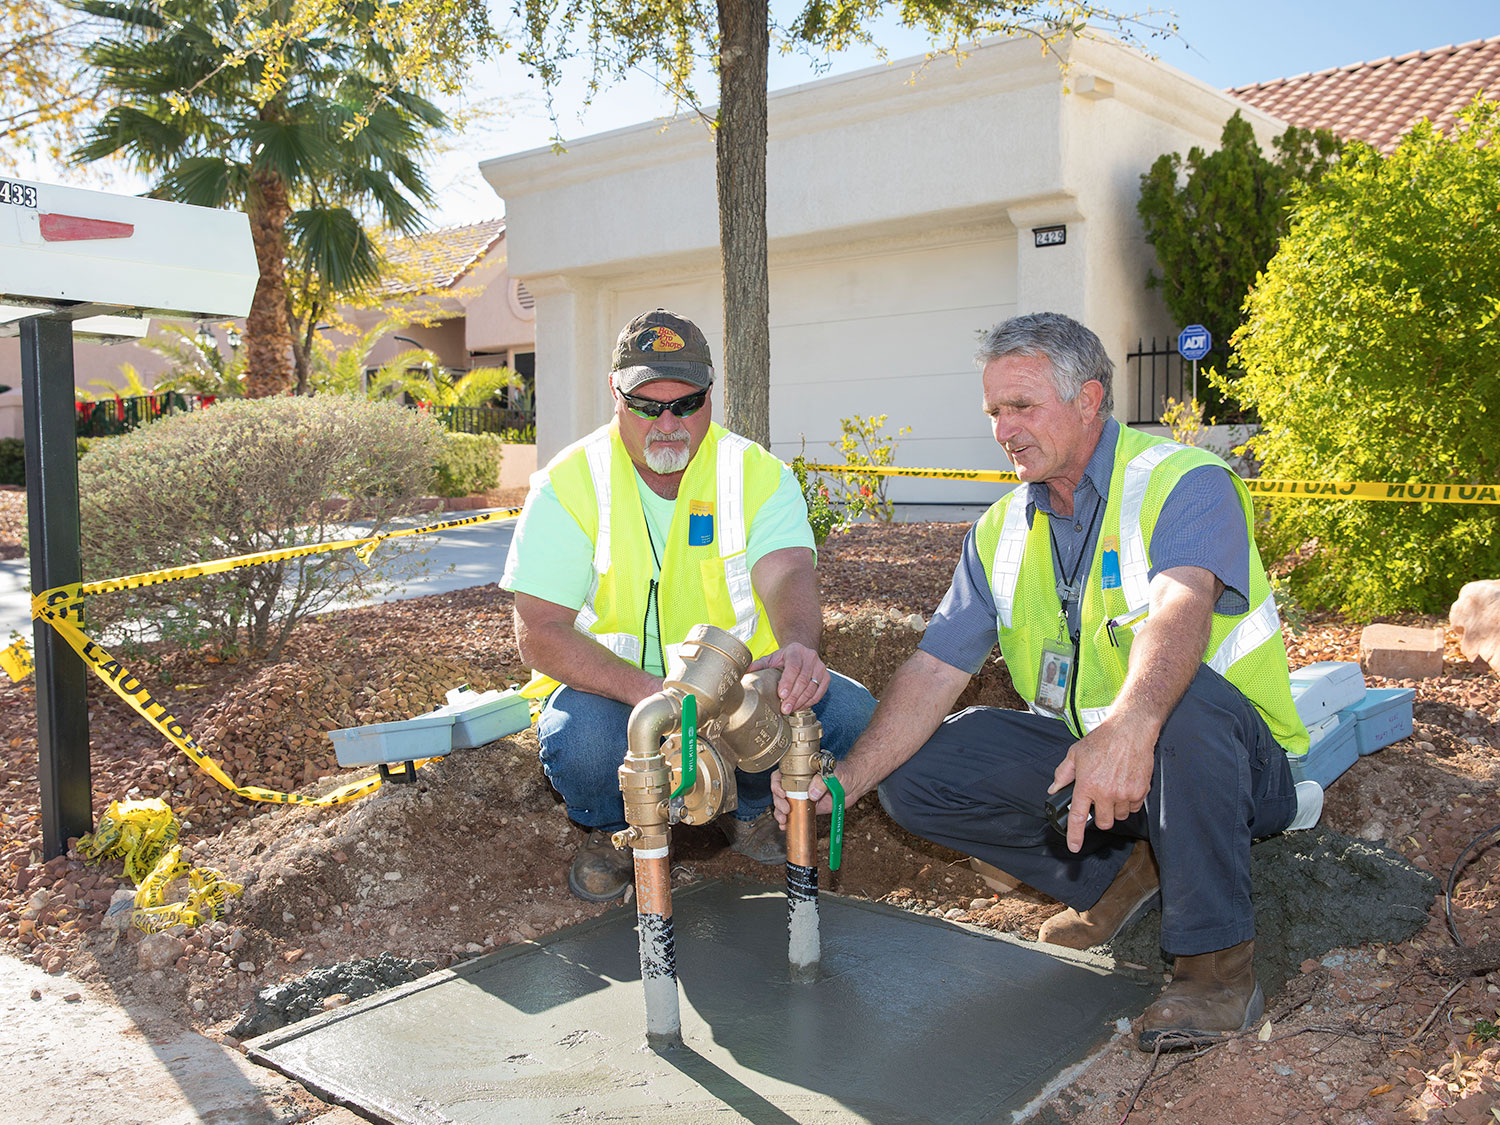 employees working on installing new water meter